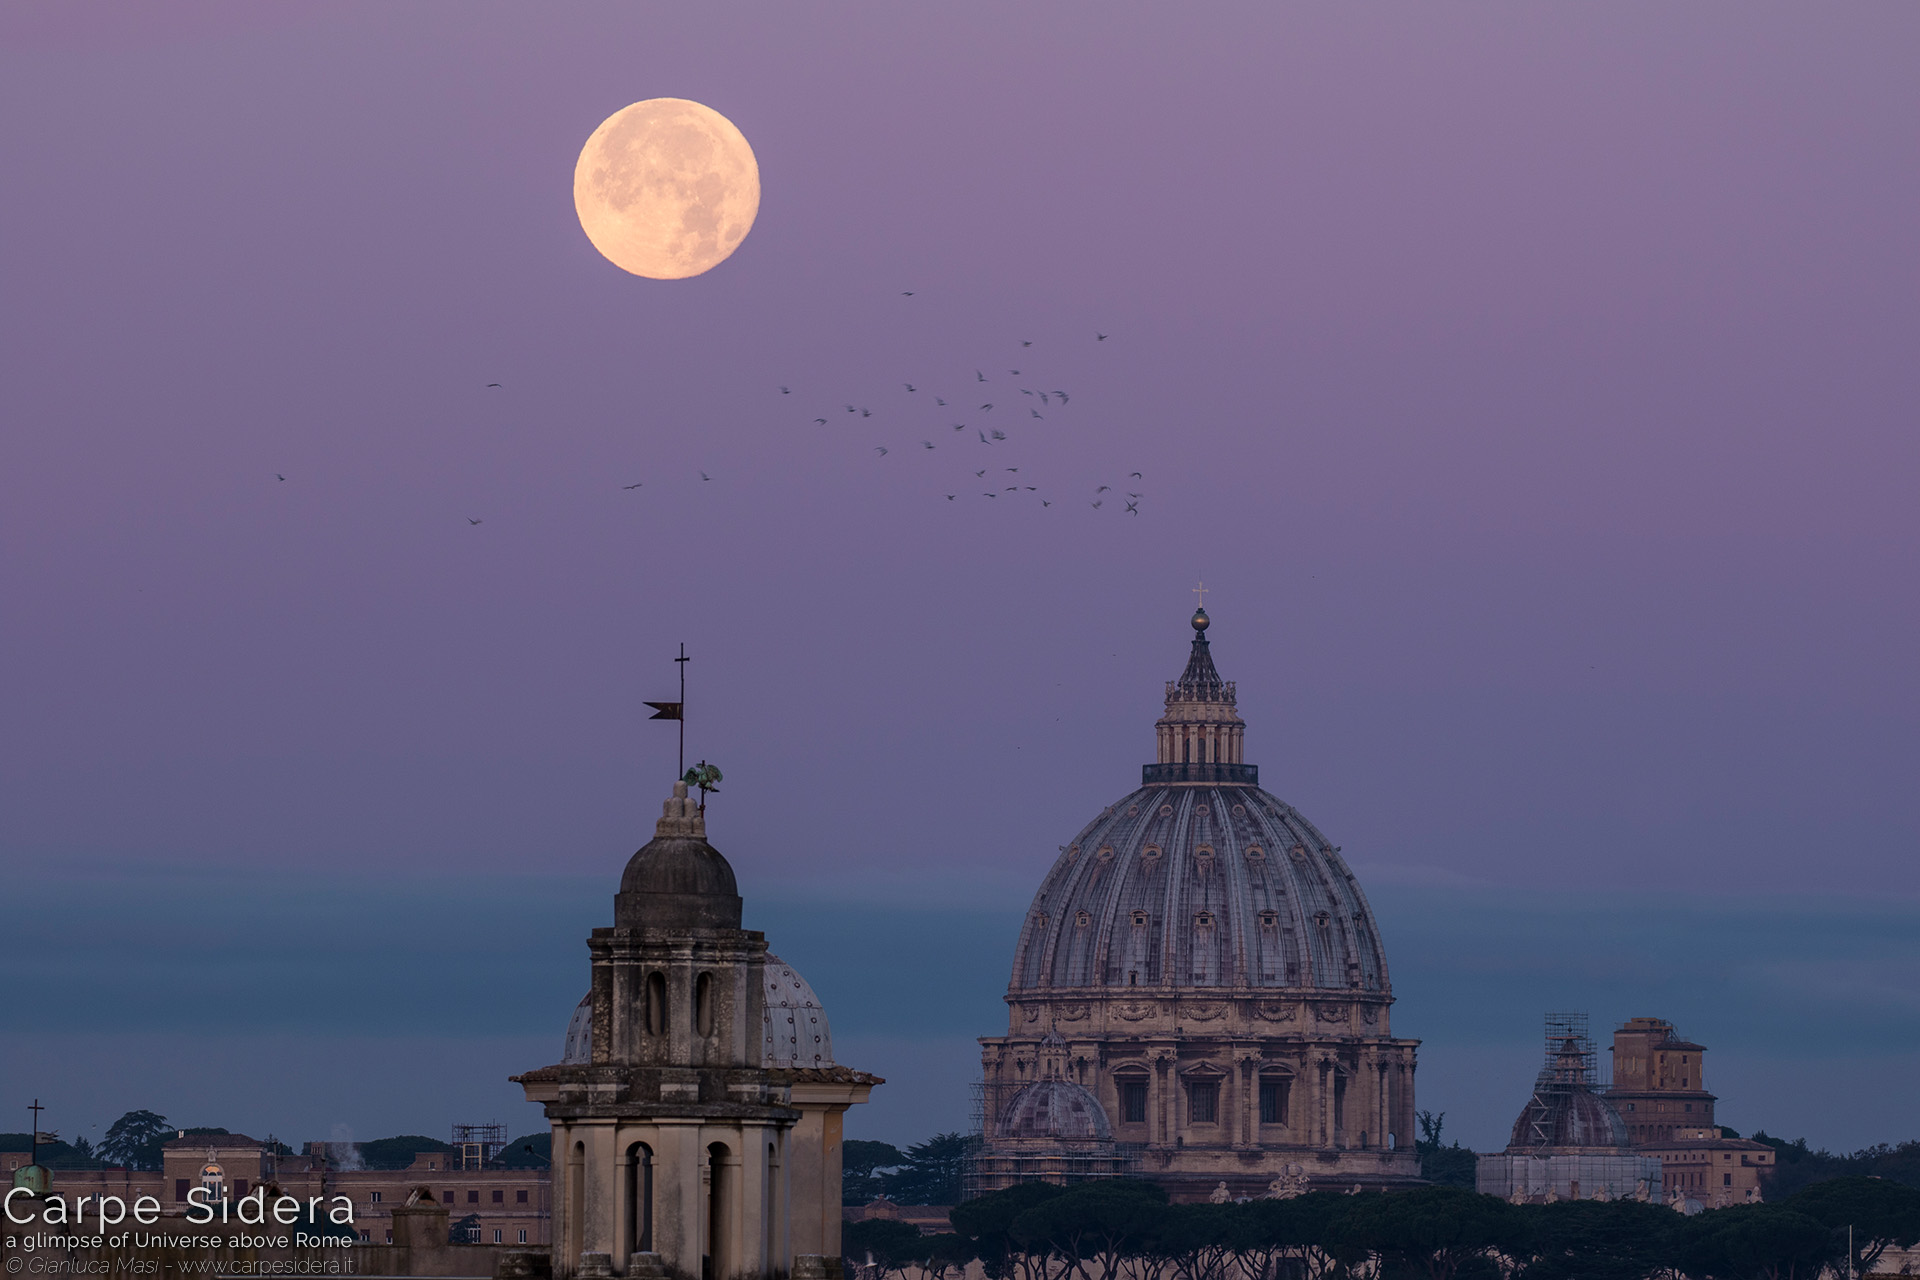 9. The 4 Dec. 2017 full Moon at perigee ("Supermoon") looms above the dome of St. Peter's, at dawn.